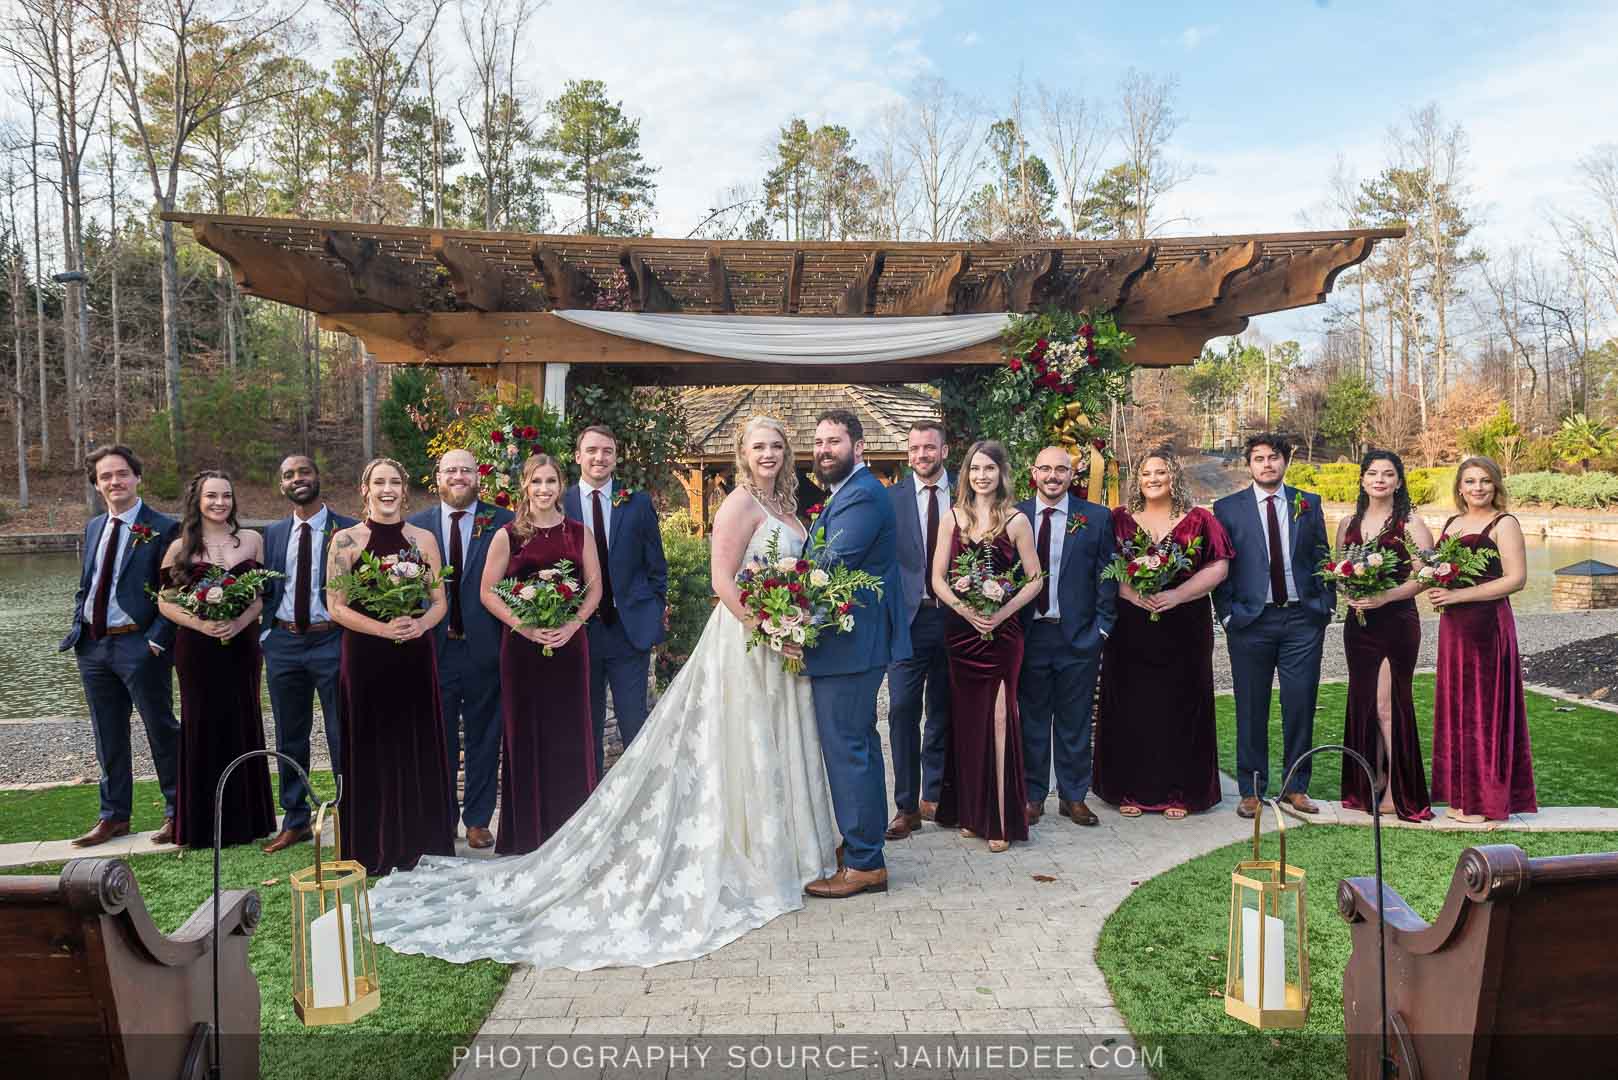 Rocky's Lake Estate Wedding Venue - bridal party portrait with full bridal party